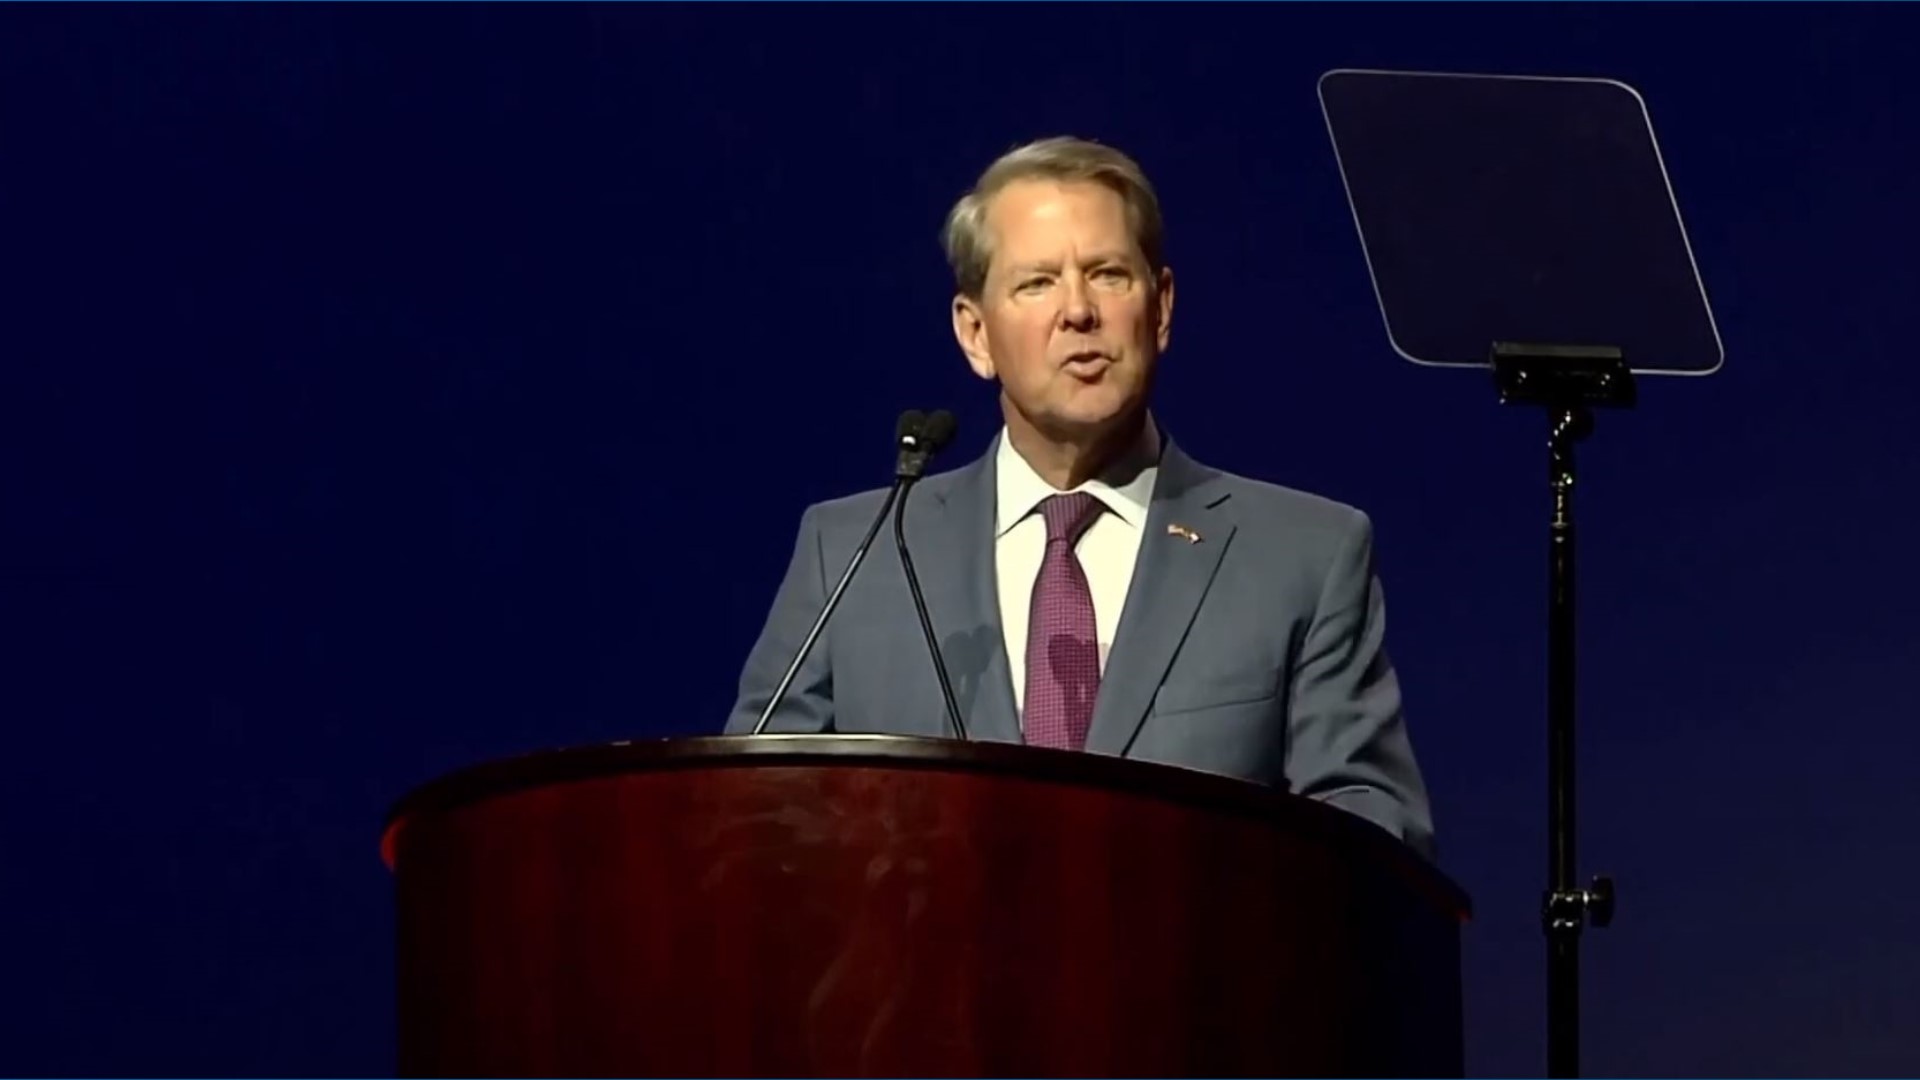 Gov. Kemp called the election "a race to the bottom."